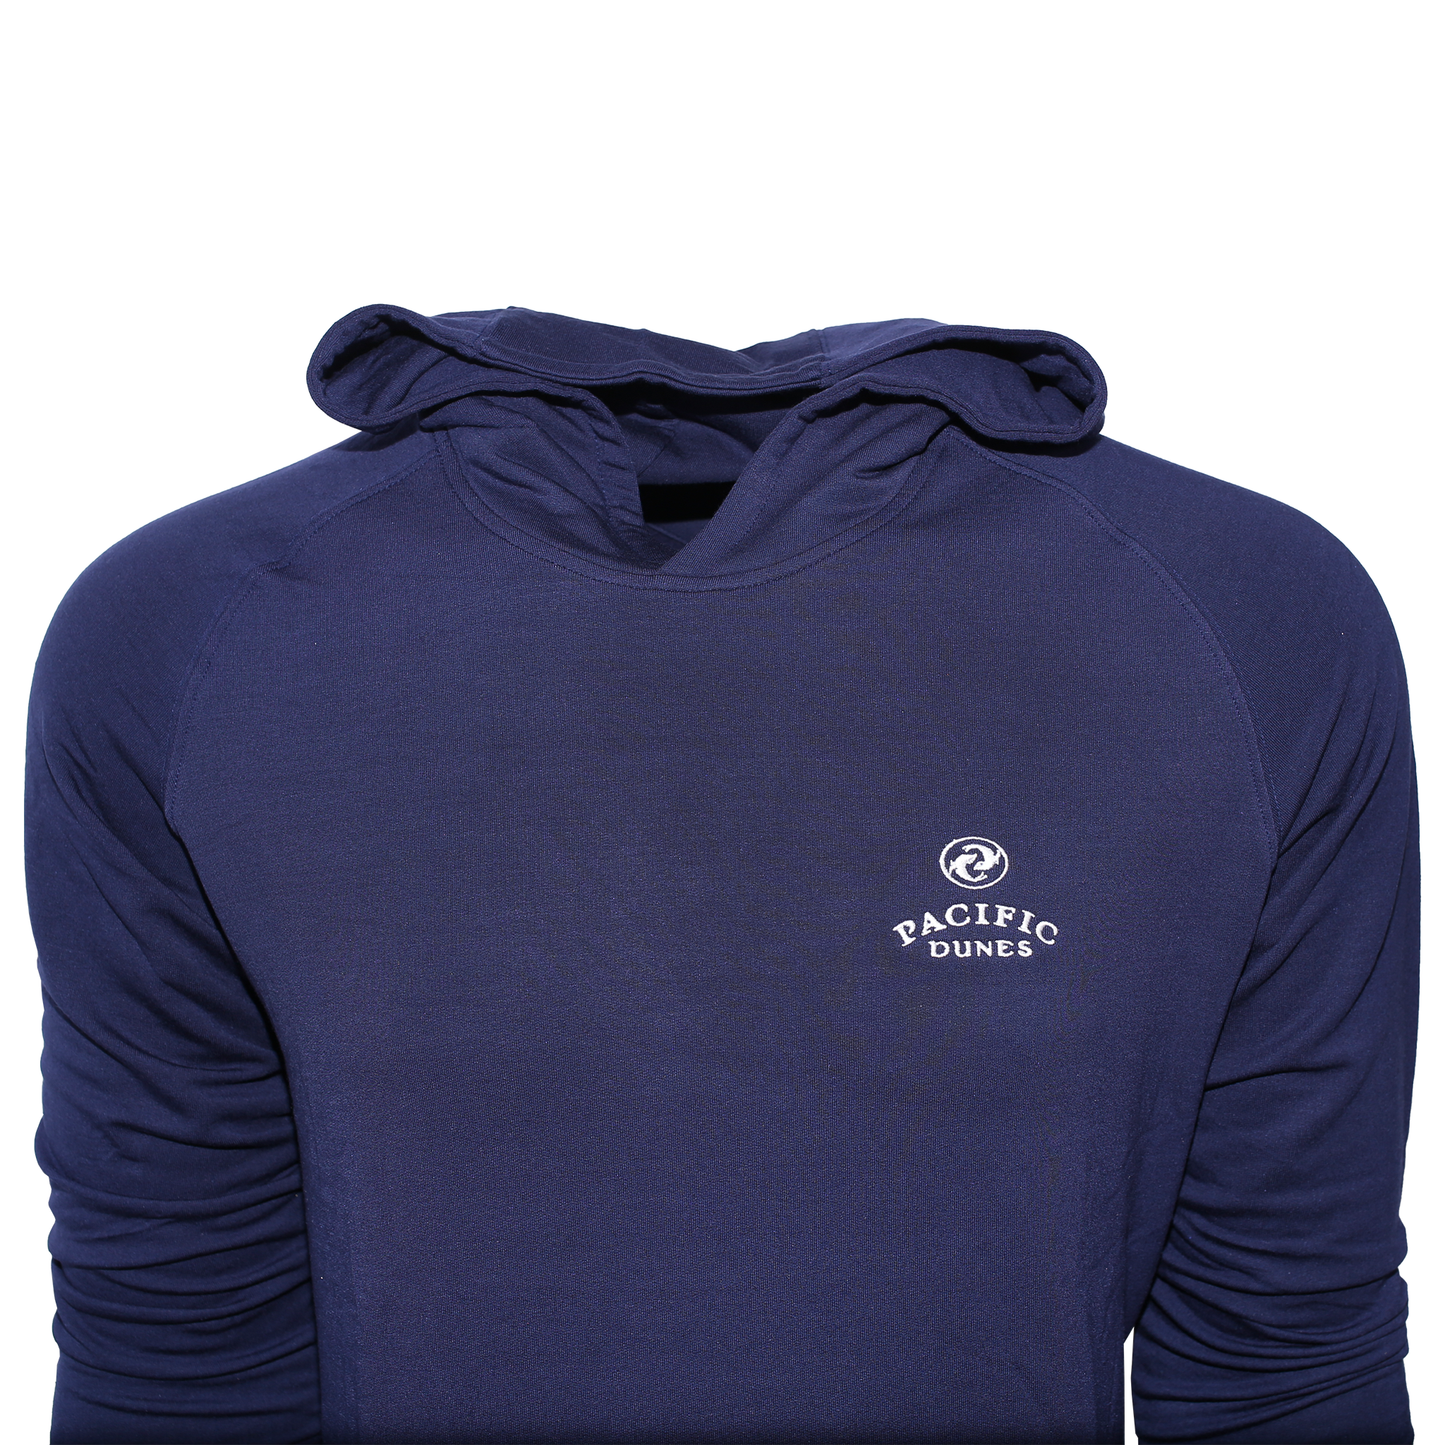 Lawson Pullover Hoodie - Pacific Dunes